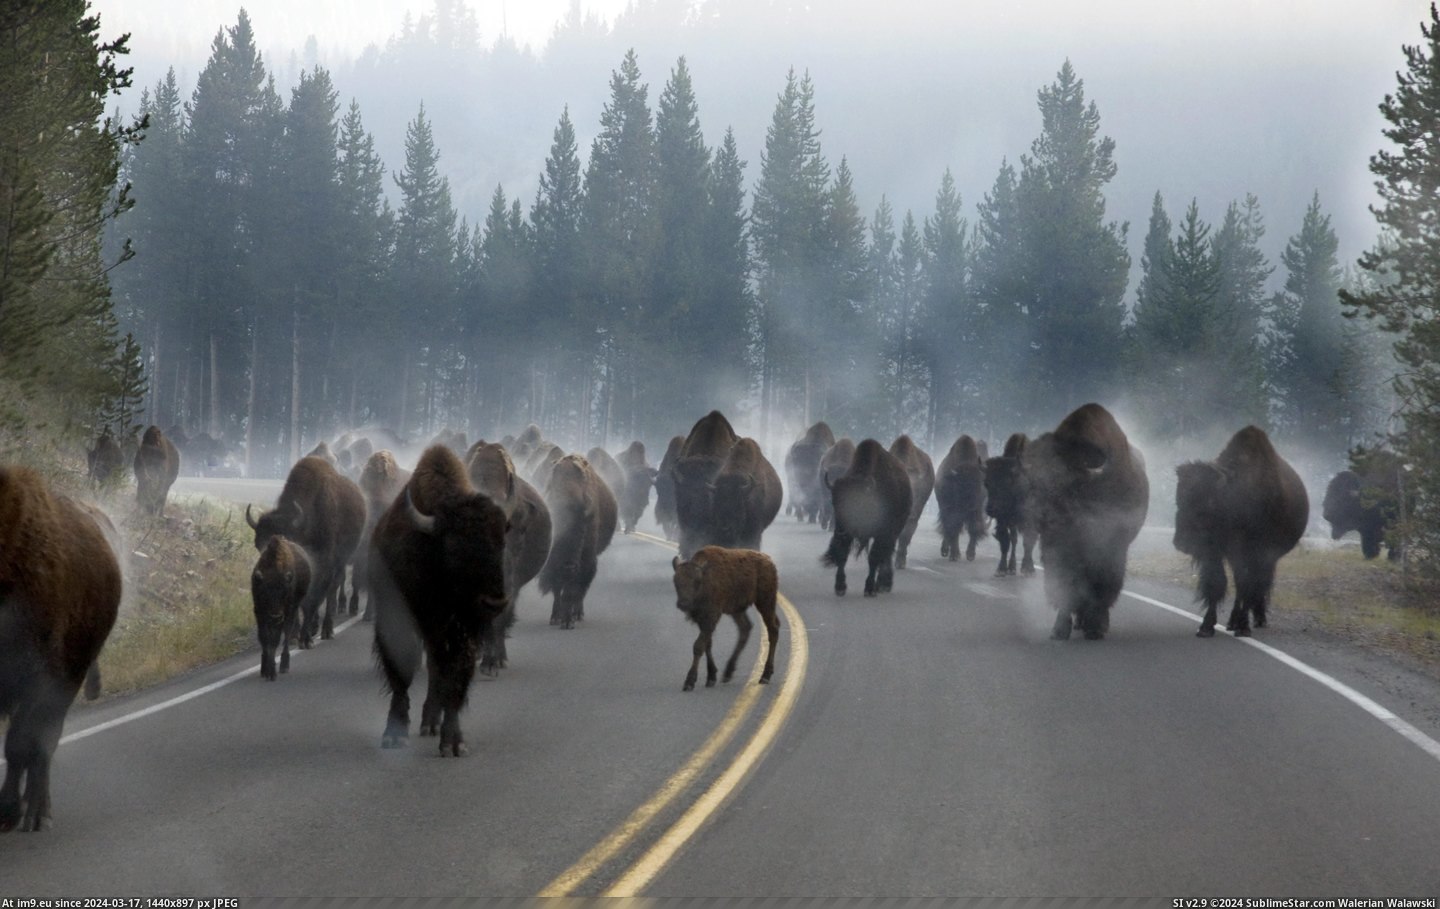 #Park #Morning #Traffic #Yellowstone #Rush #National #Hour [Pics] Morning rush hour traffic in Yellowstone National Park Pic. (Image of album My r/PICS favs))